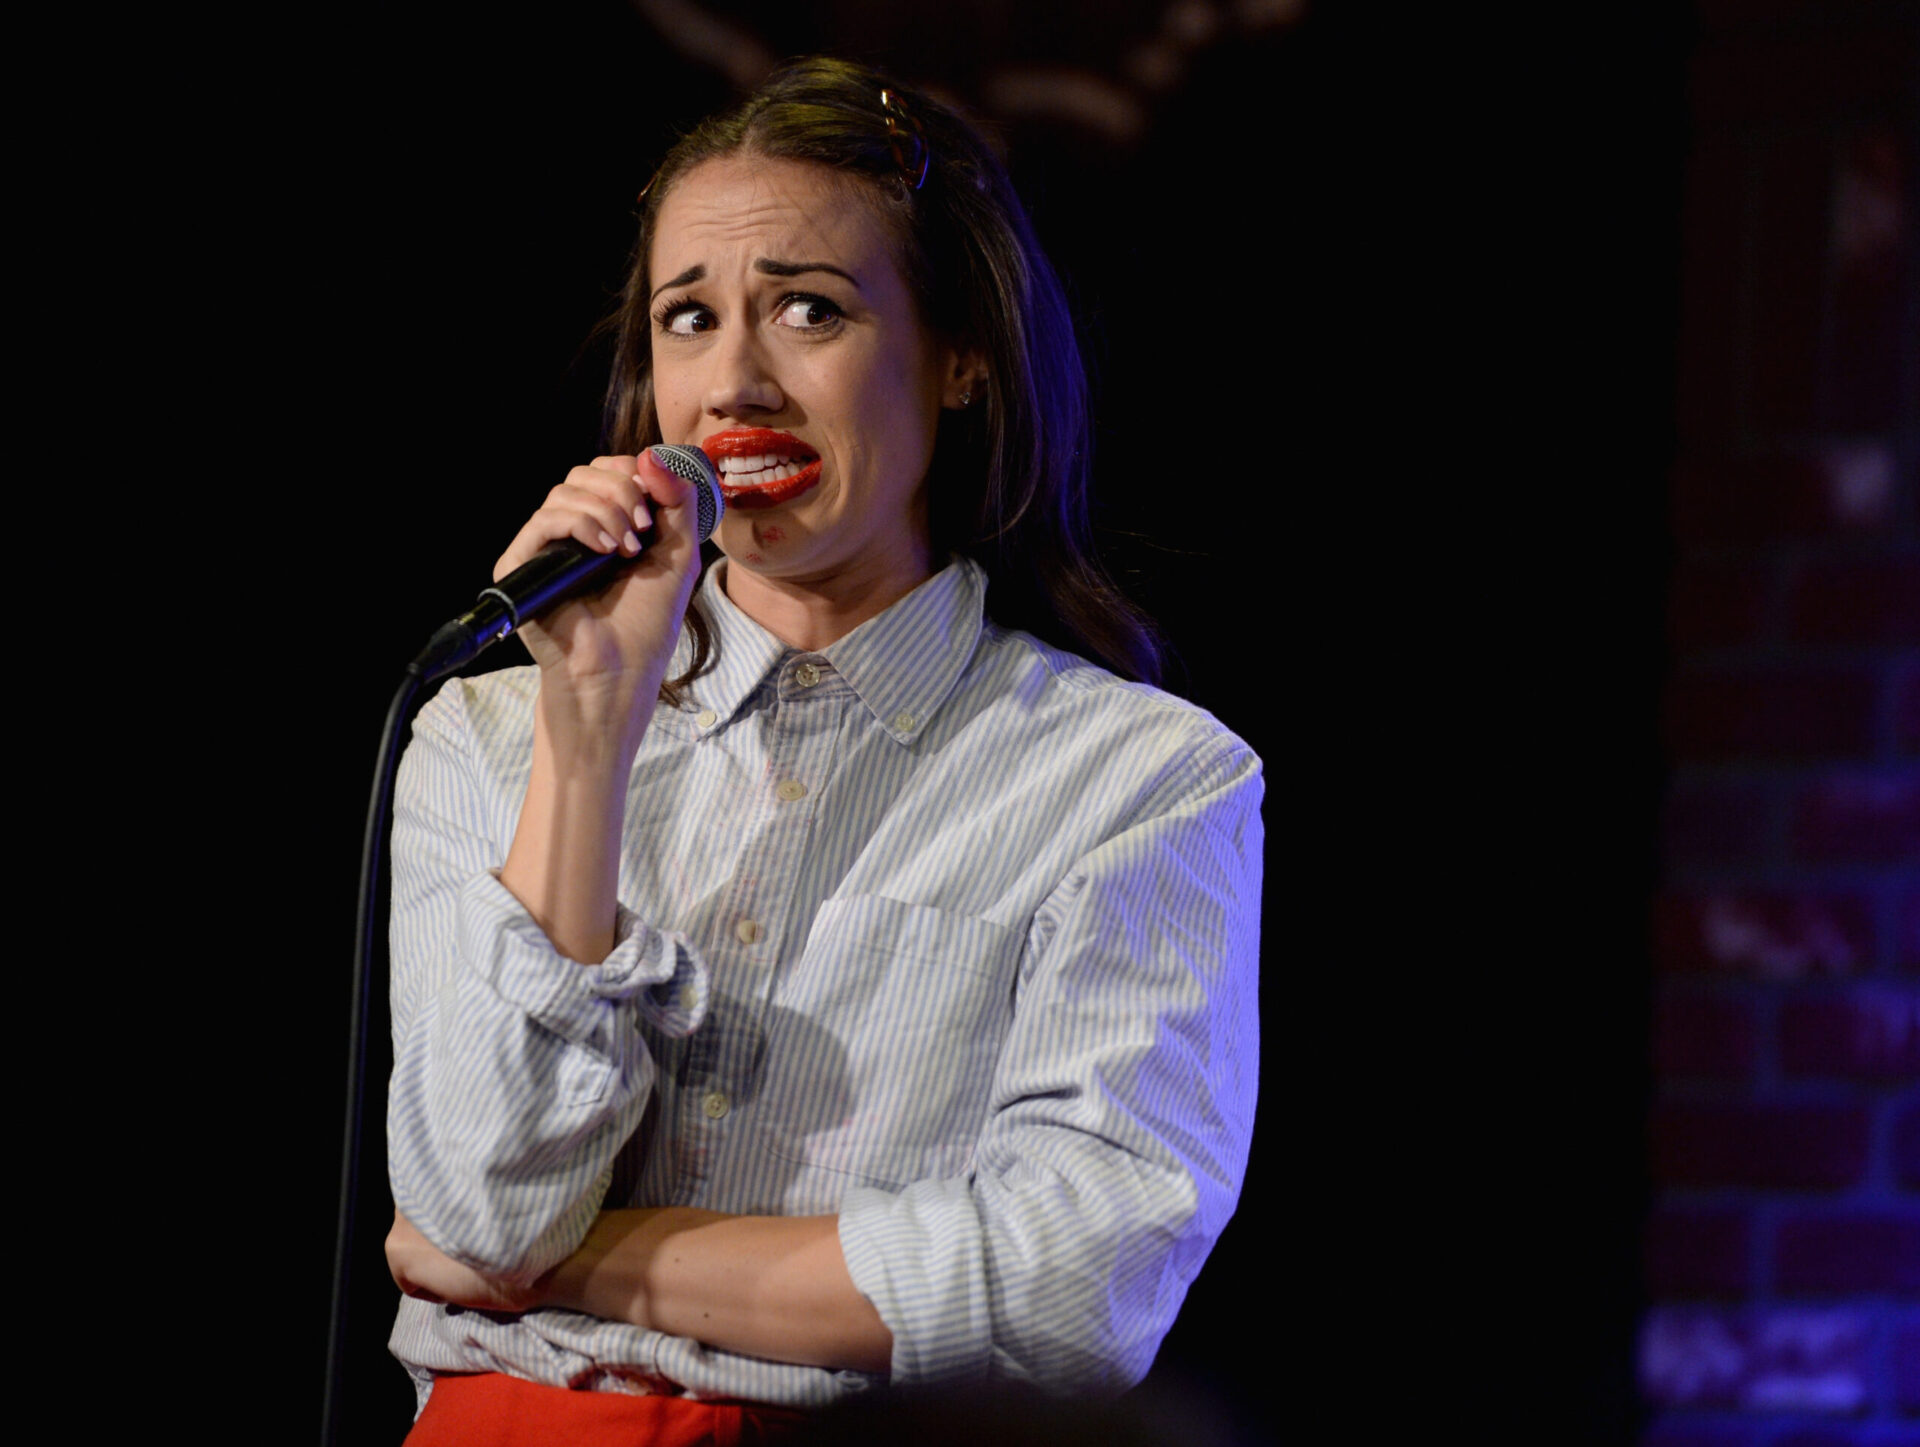 YouTube Star Colleen Ballinger Dragged For Performing Beyonce’s ‘Single Ladies’ In Blackface